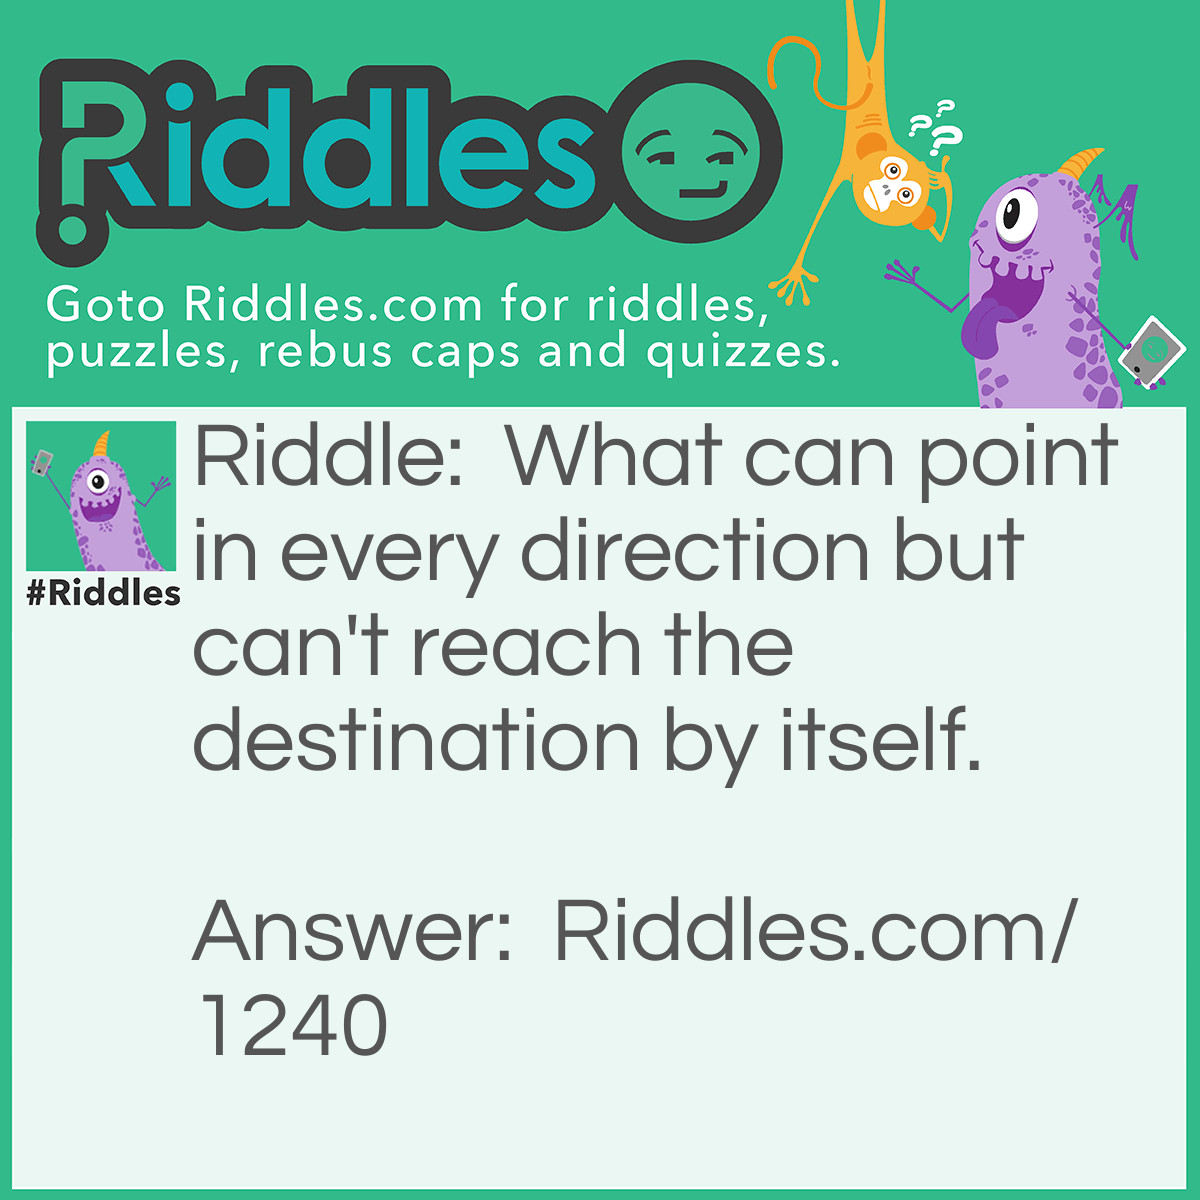 Riddle: What can point in every direction but can't reach the destination by itself? Answer: Your finger or a compass.